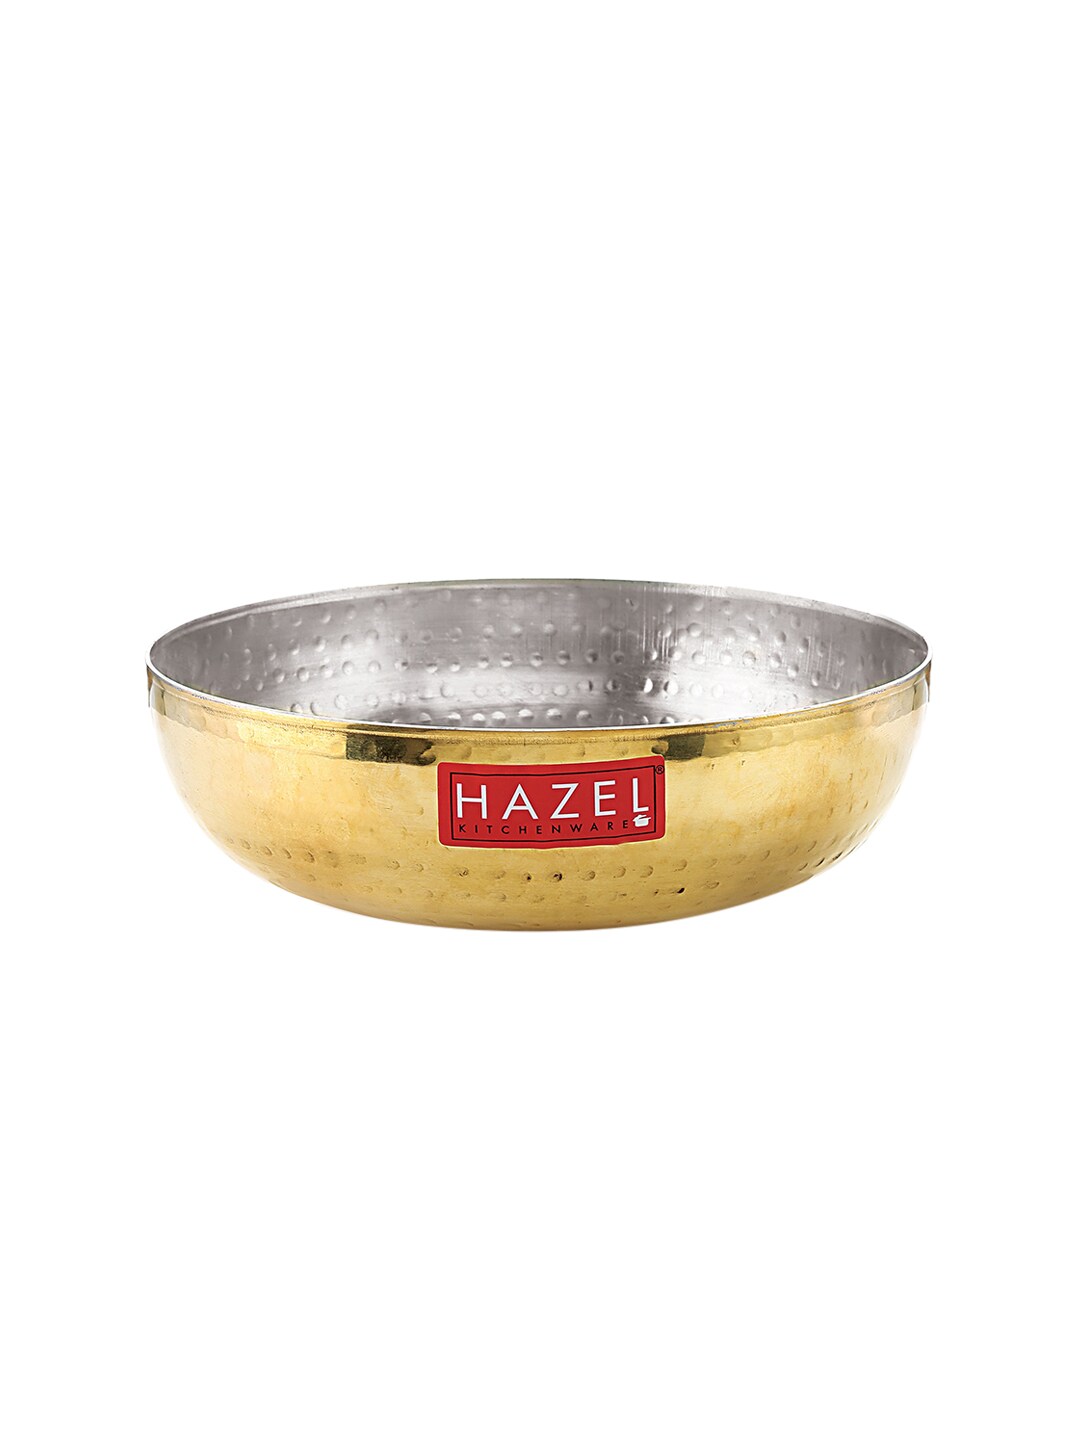 HAZEL Gold-Toned Solid Kadhai With Lid Price in India